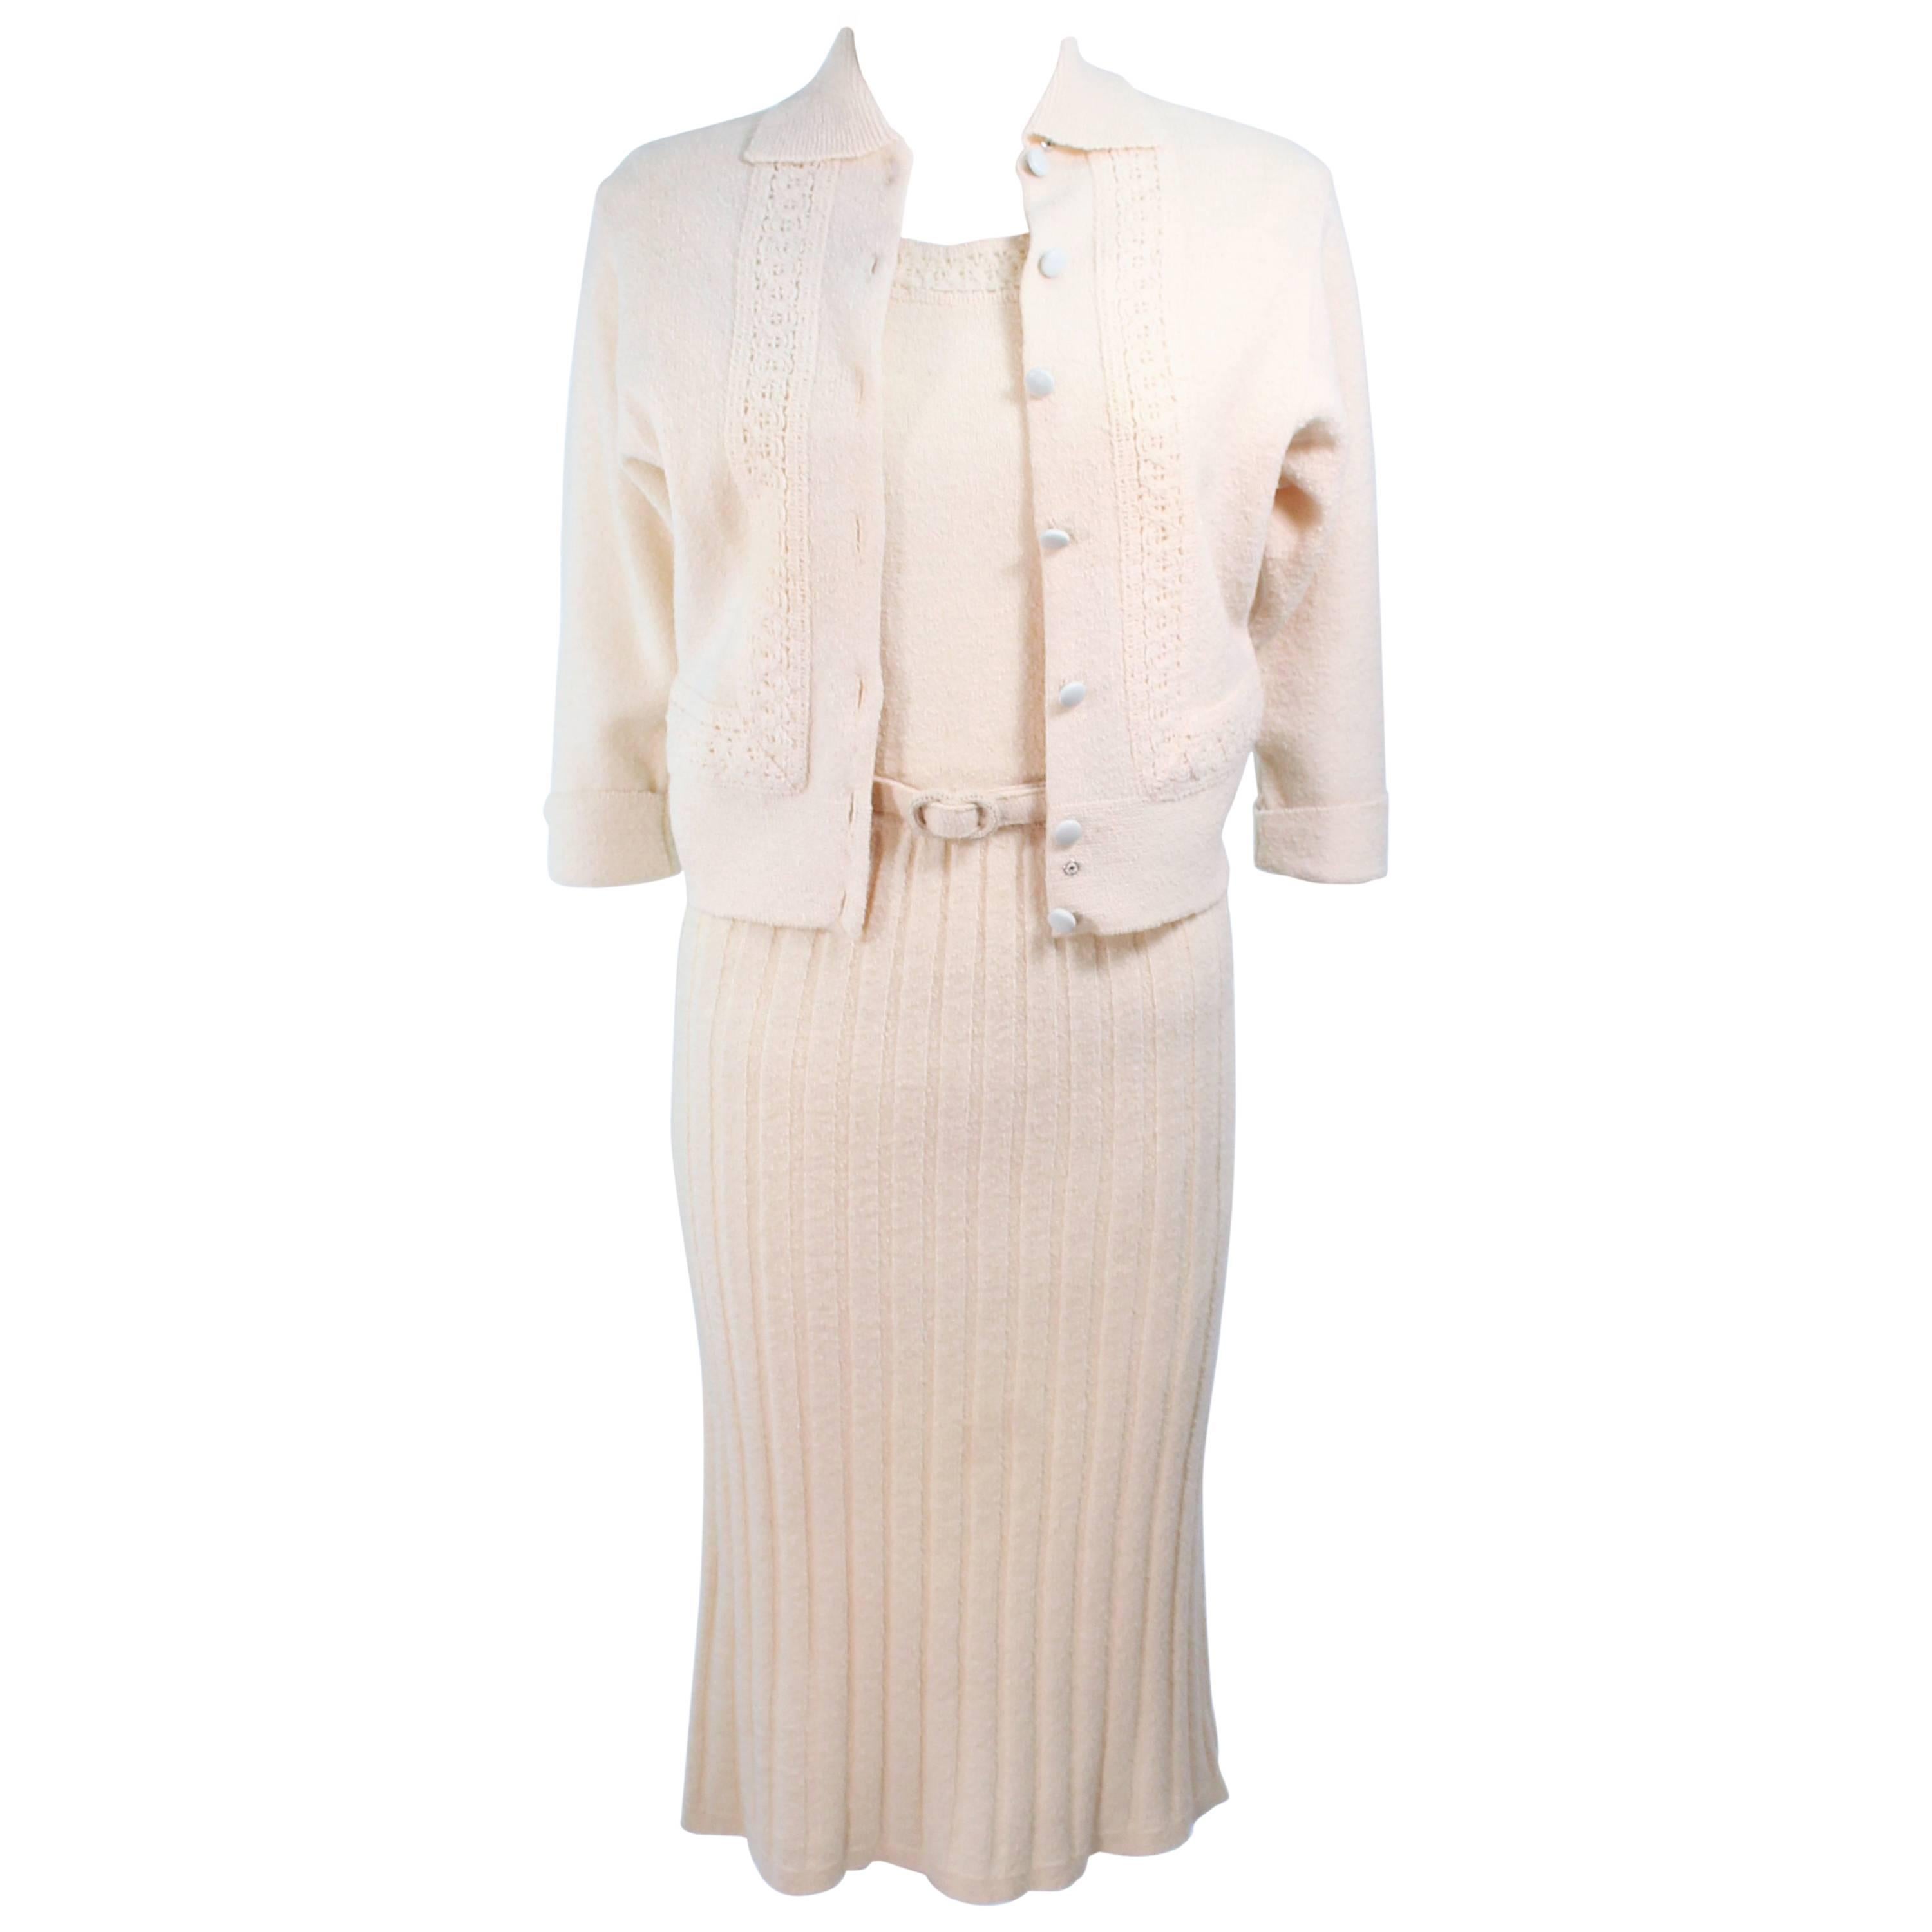 Ivory 1950's Zephyr Chenille Wool Stretch Knit Dress and Sweater Ensemble Size 4 For Sale